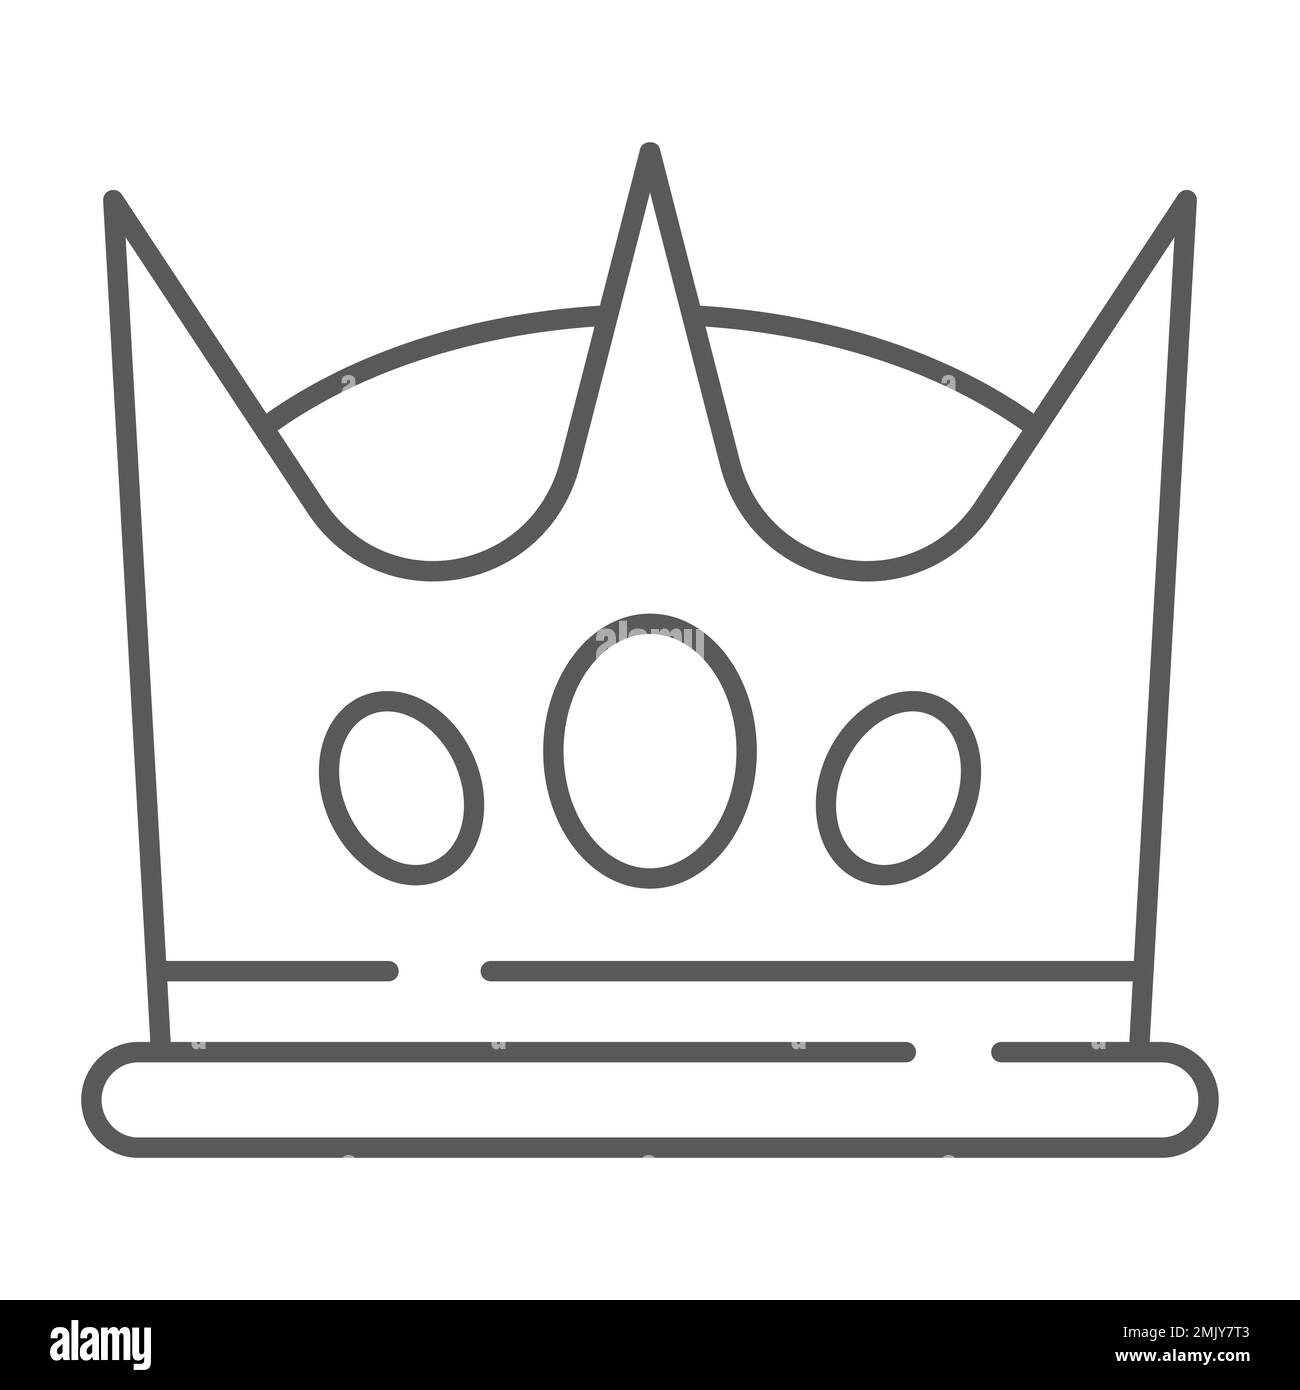 Chess Piece, shapes, miscellaneous, Royalty, king, Queen, crown icon